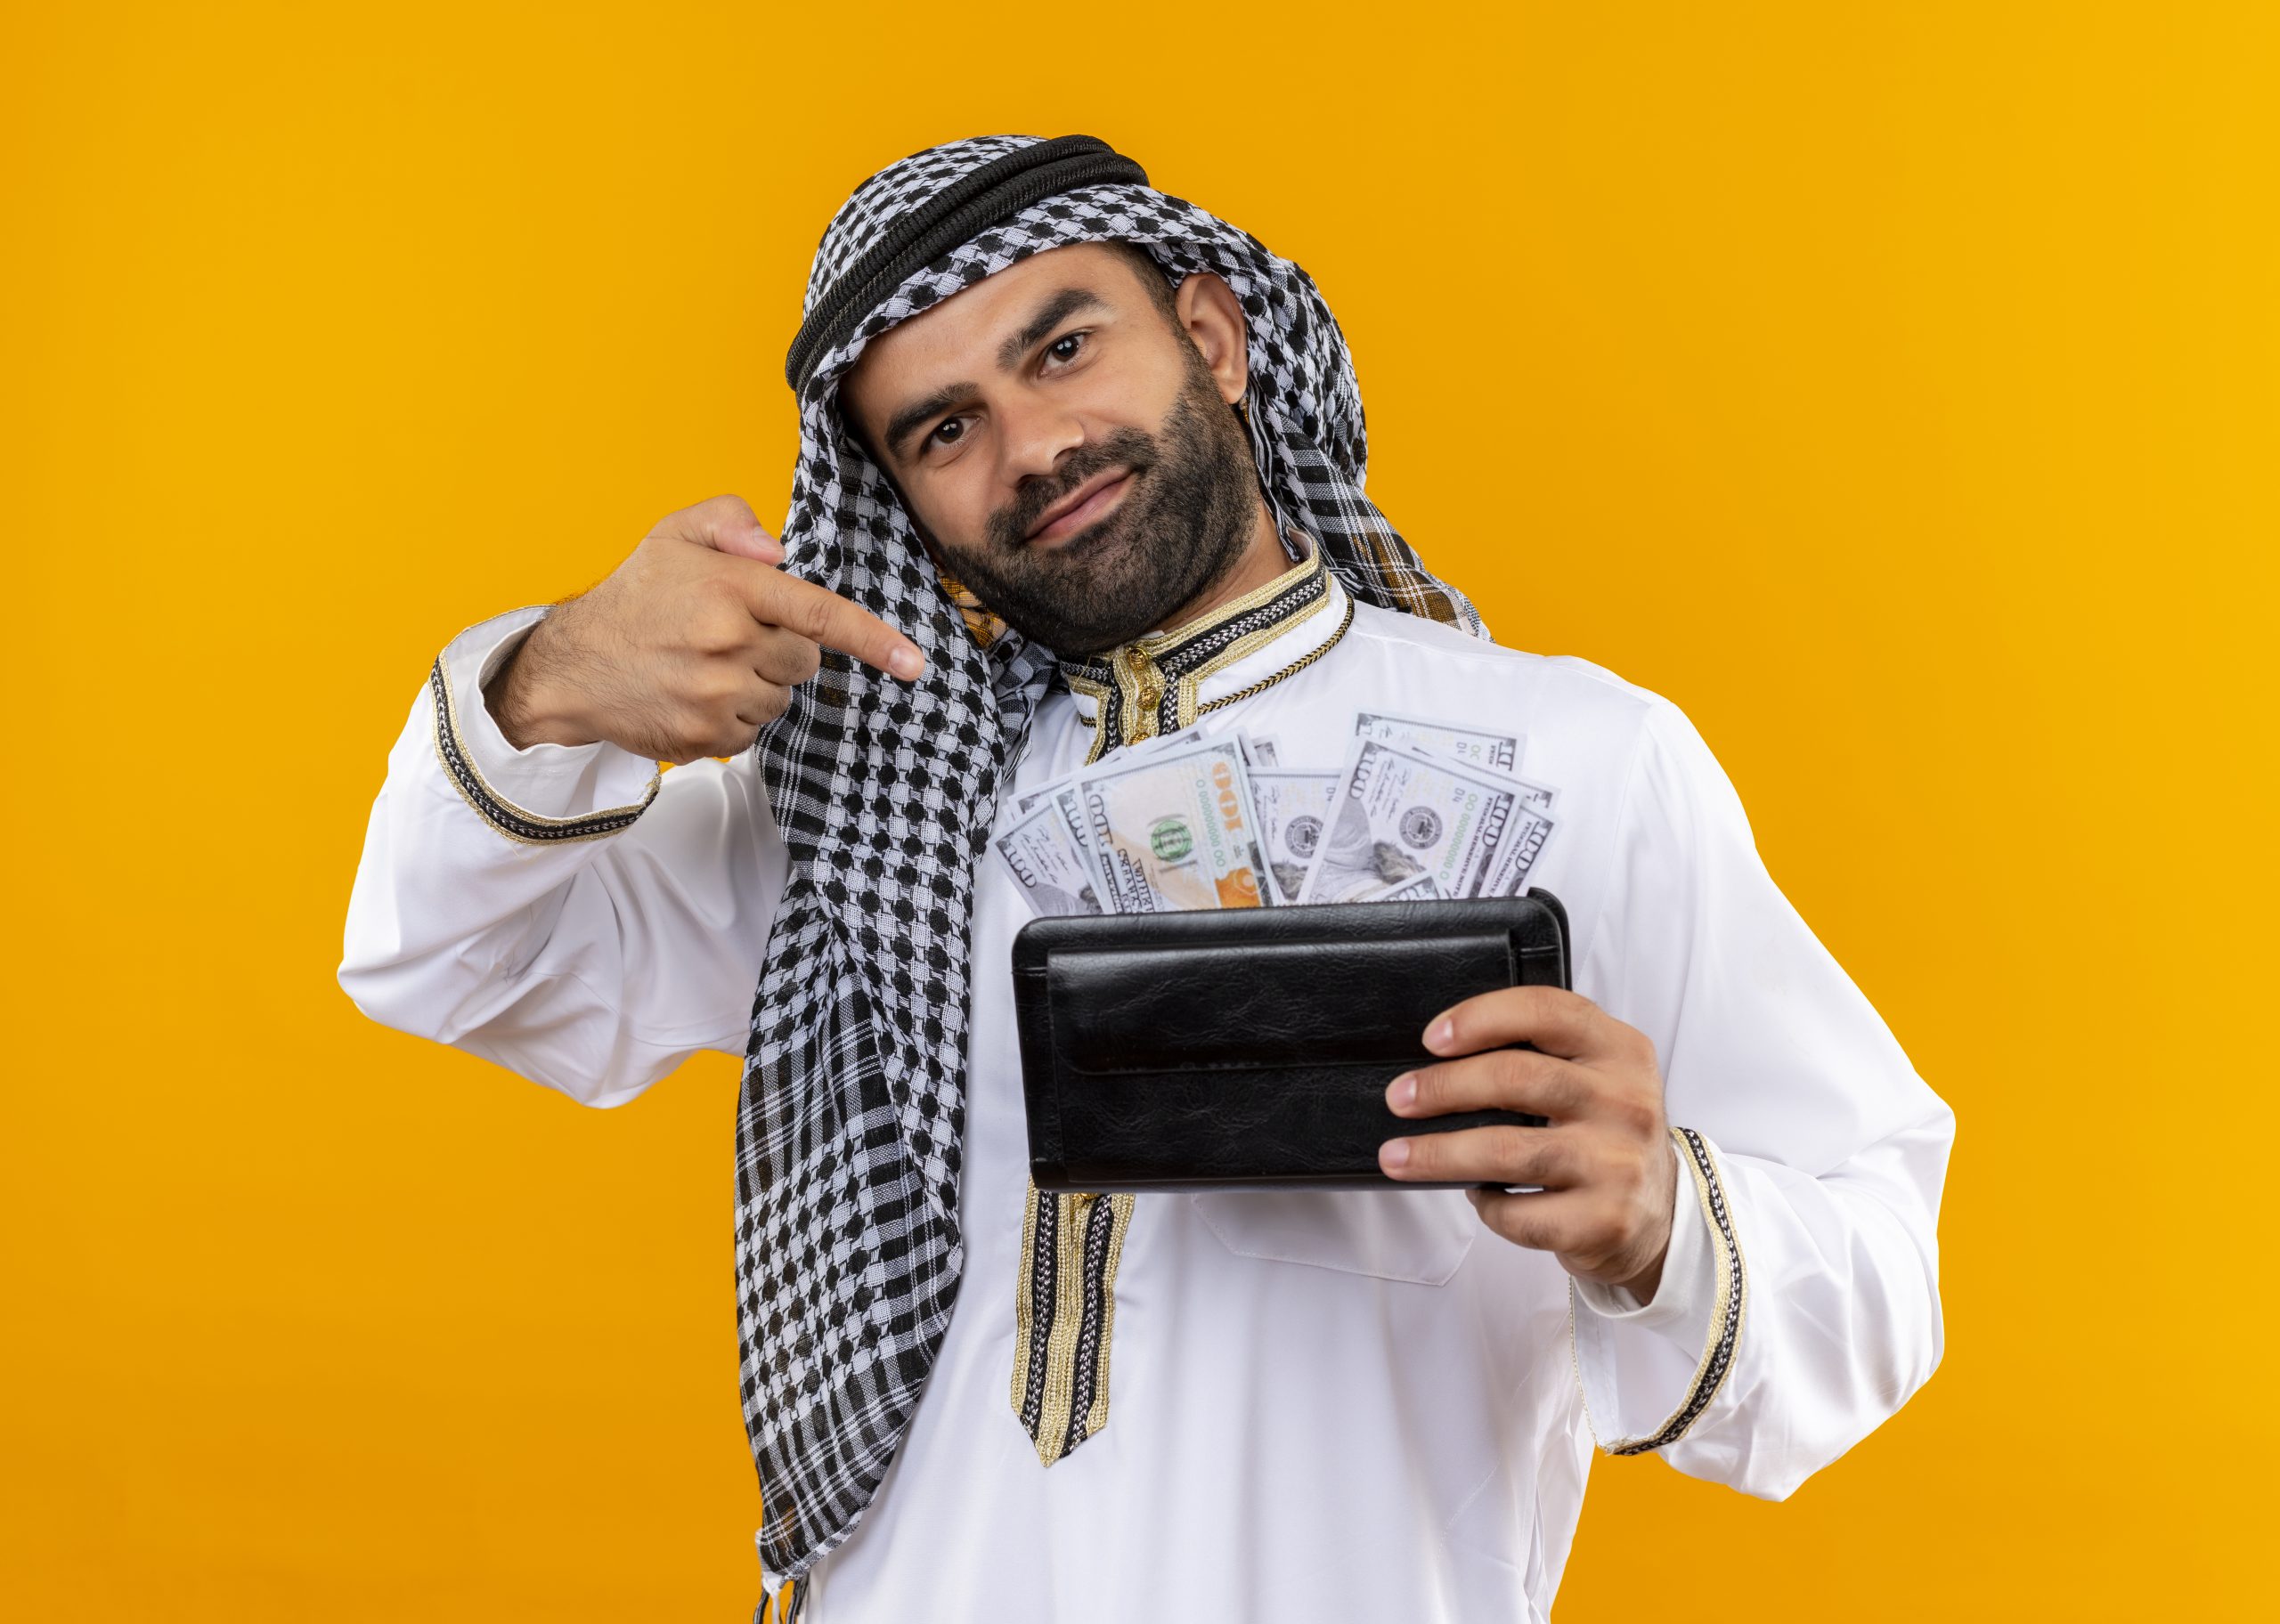 arabic businessman in traditional wear holding wallet with cash looking at camera smiling confident pointing with finger to cash standing over orange background